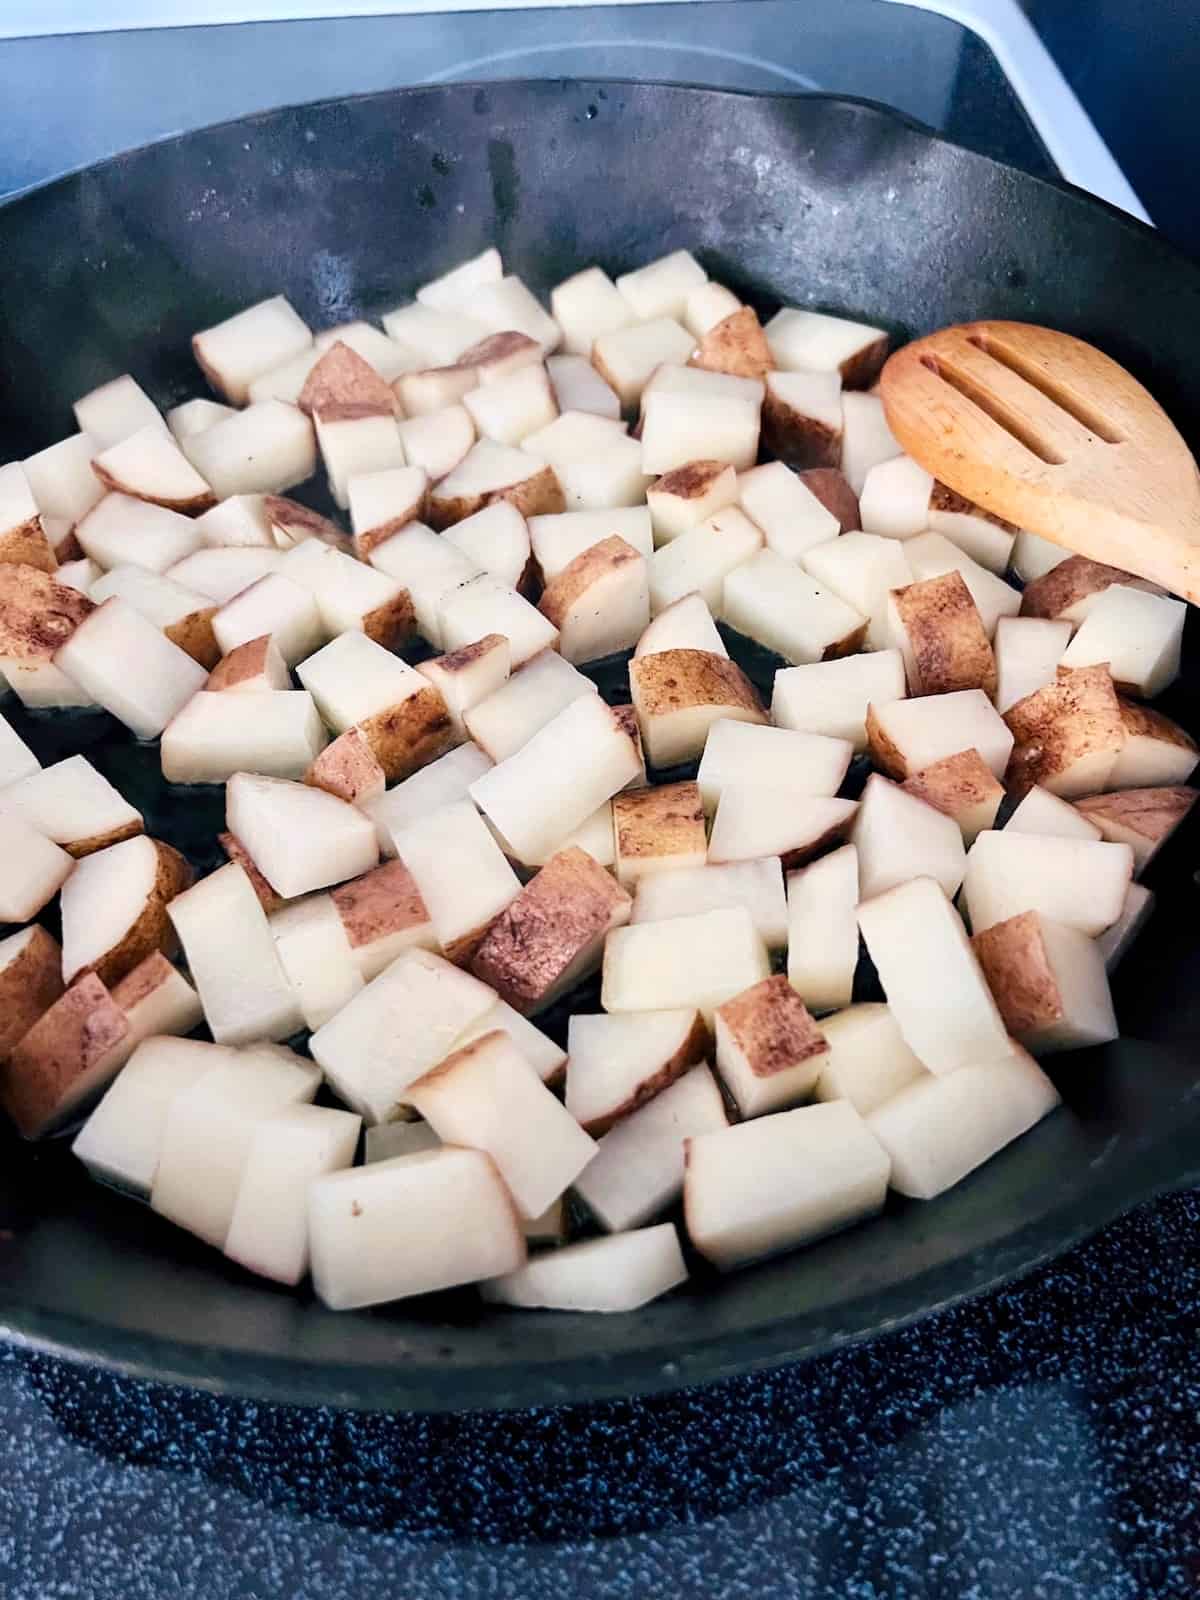 Cubed potatoes in the cast iron skillet with hot oil.